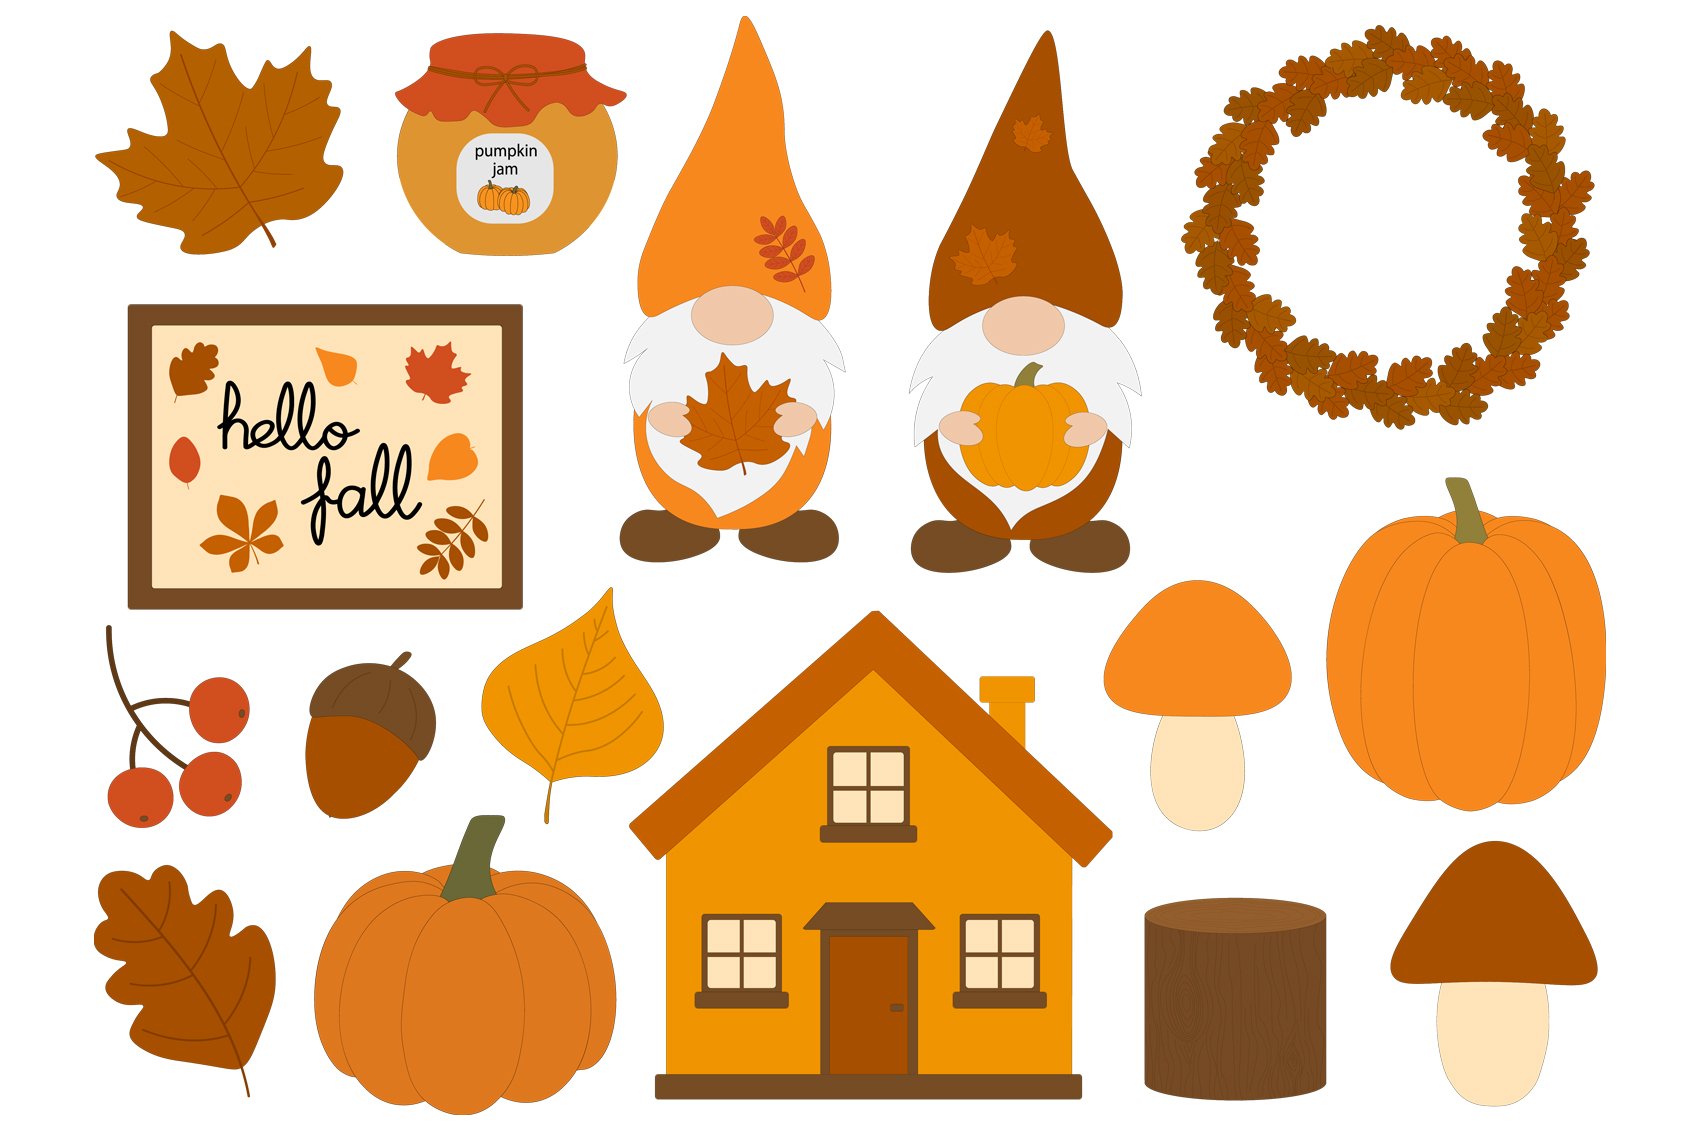 Diverse of brown items for creating cool fall illustration.